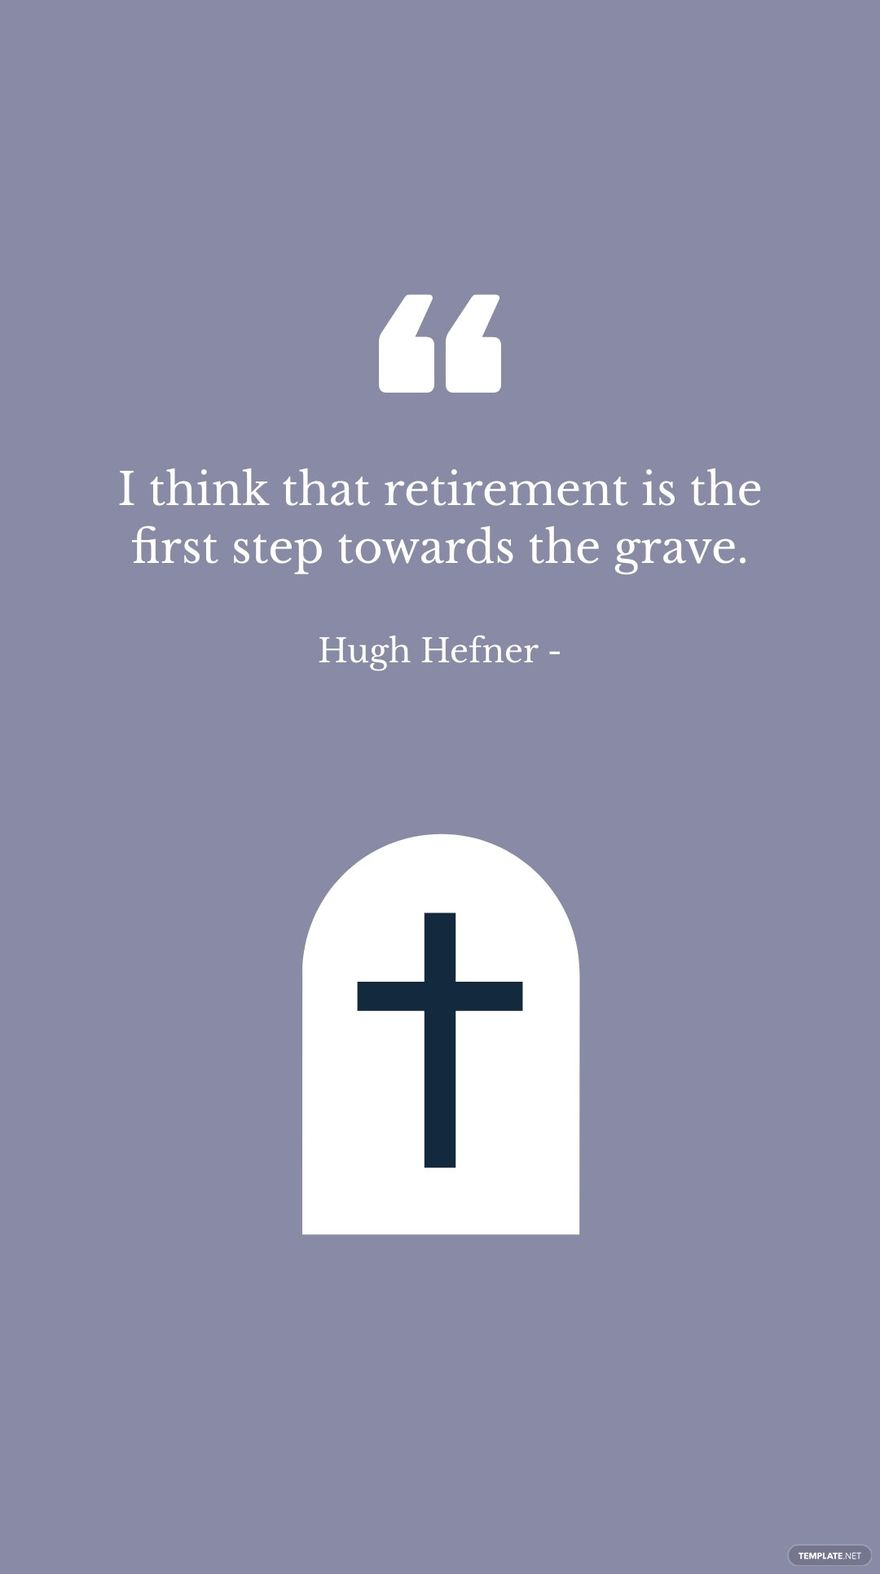 Free Hugh Hefner - I think that retirement is the first step towards the grave. in JPG